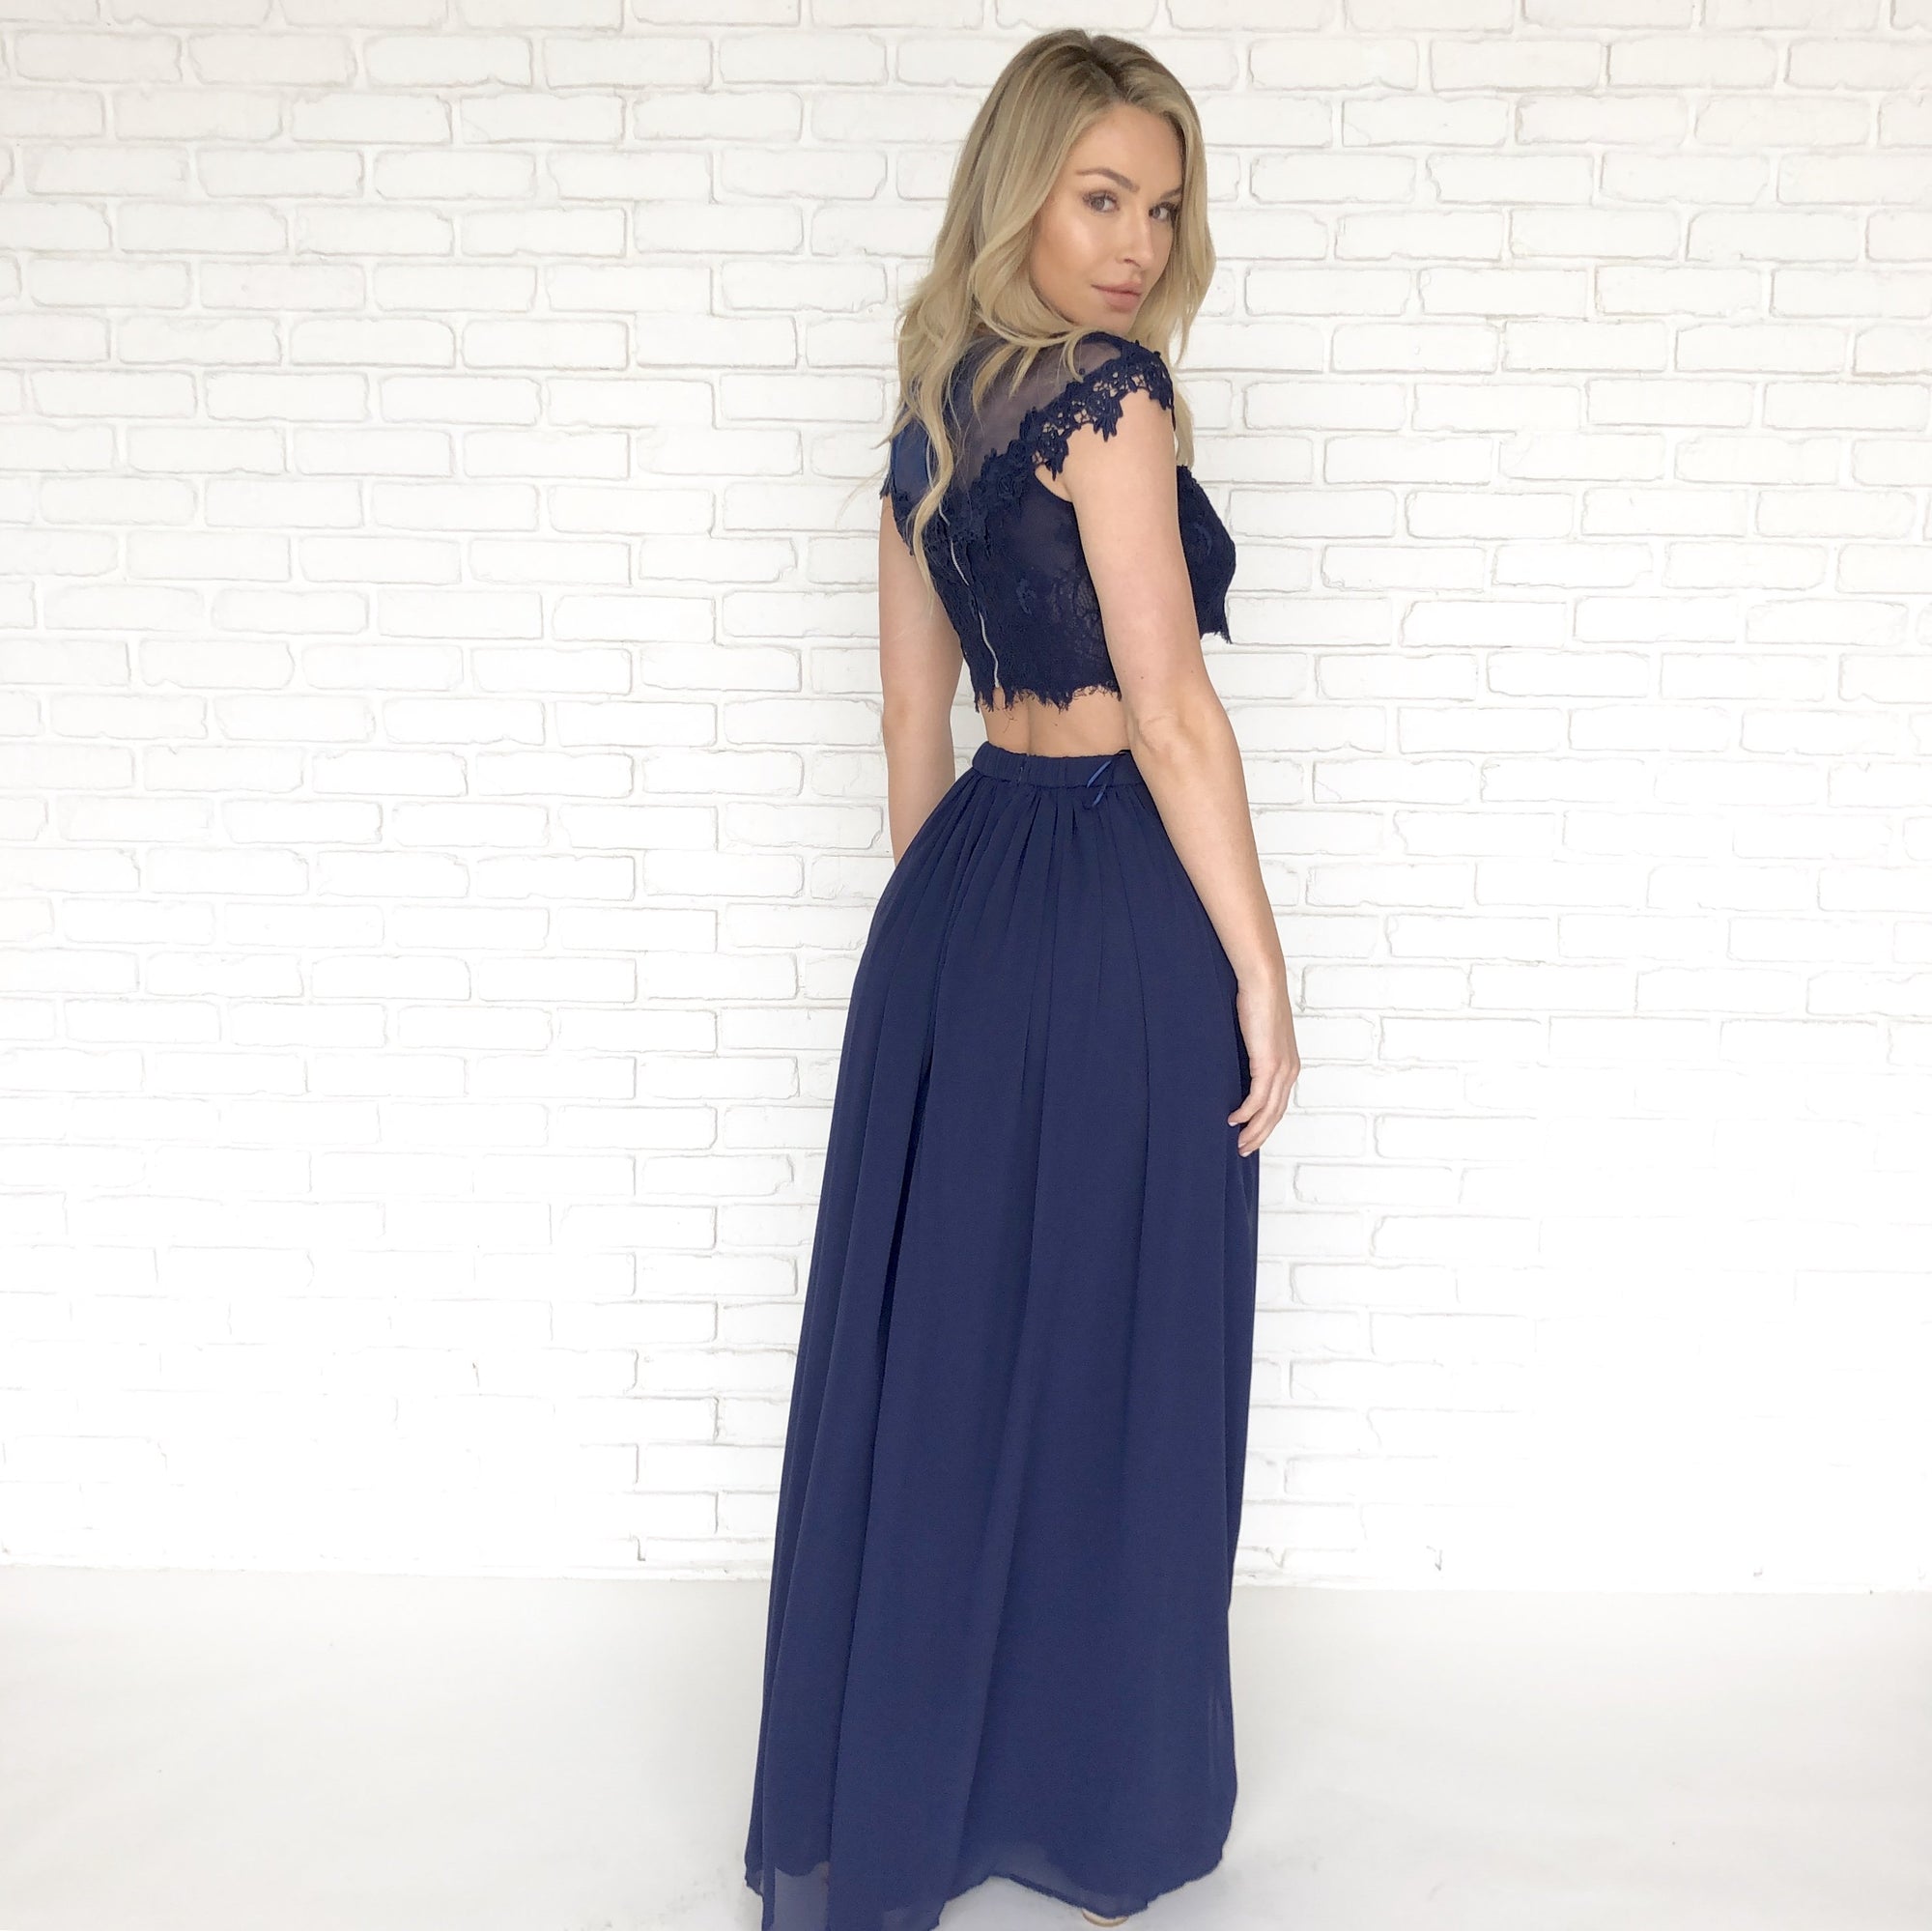 Dance With Me Lace Top & Maxi Skirt Set In Navy Blue - Dainty Hooligan